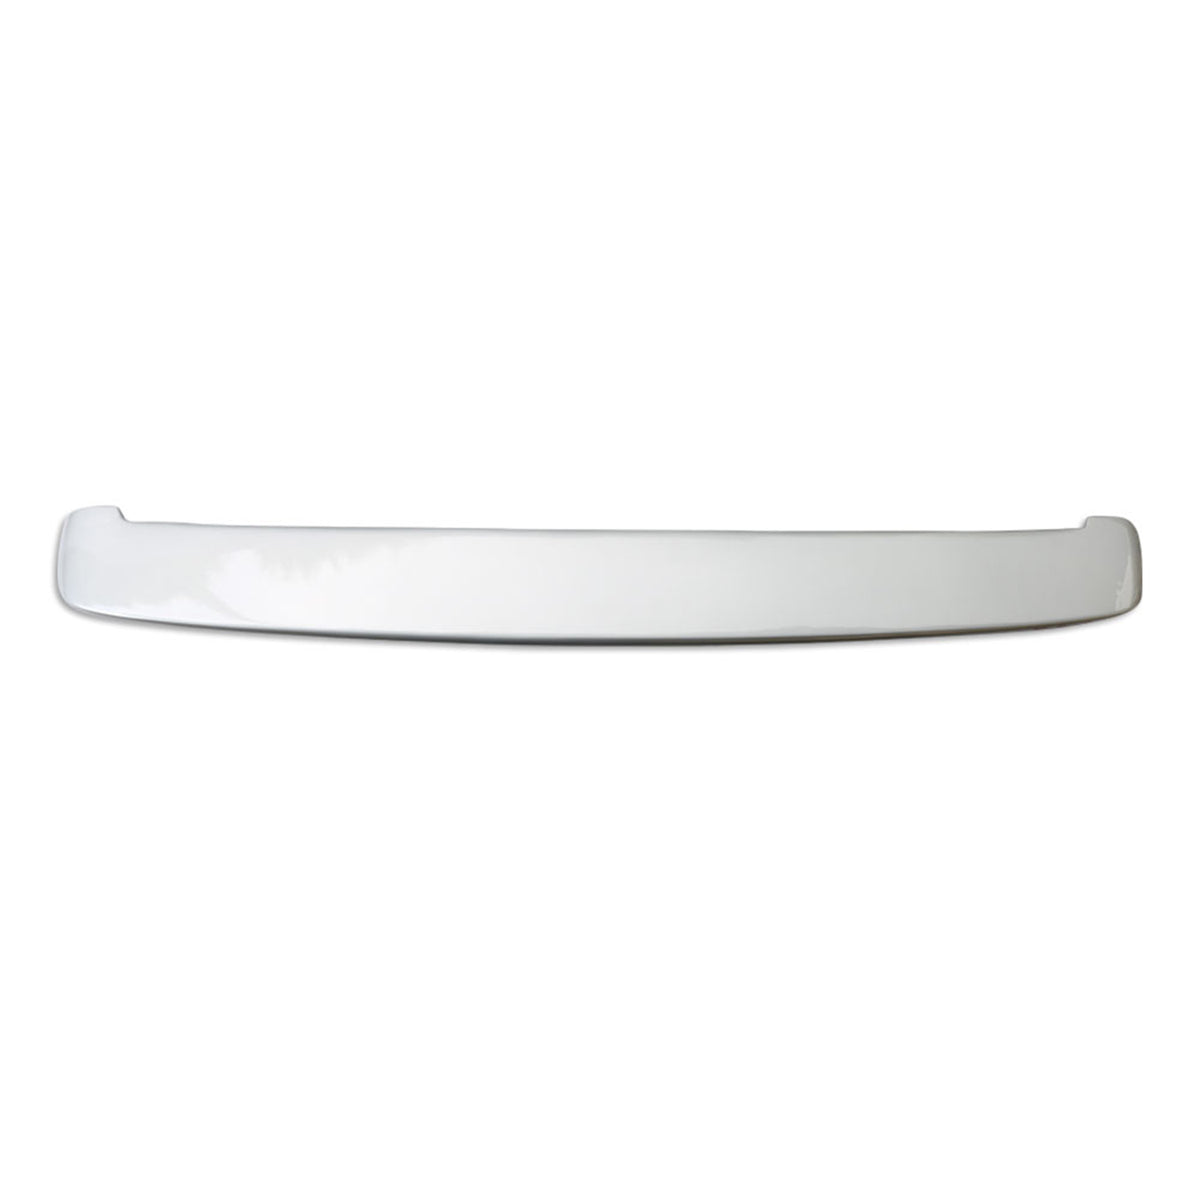 Spoiler roof spoiler wings for Mercedes-Benz Vito W447 2014-2020 painted white